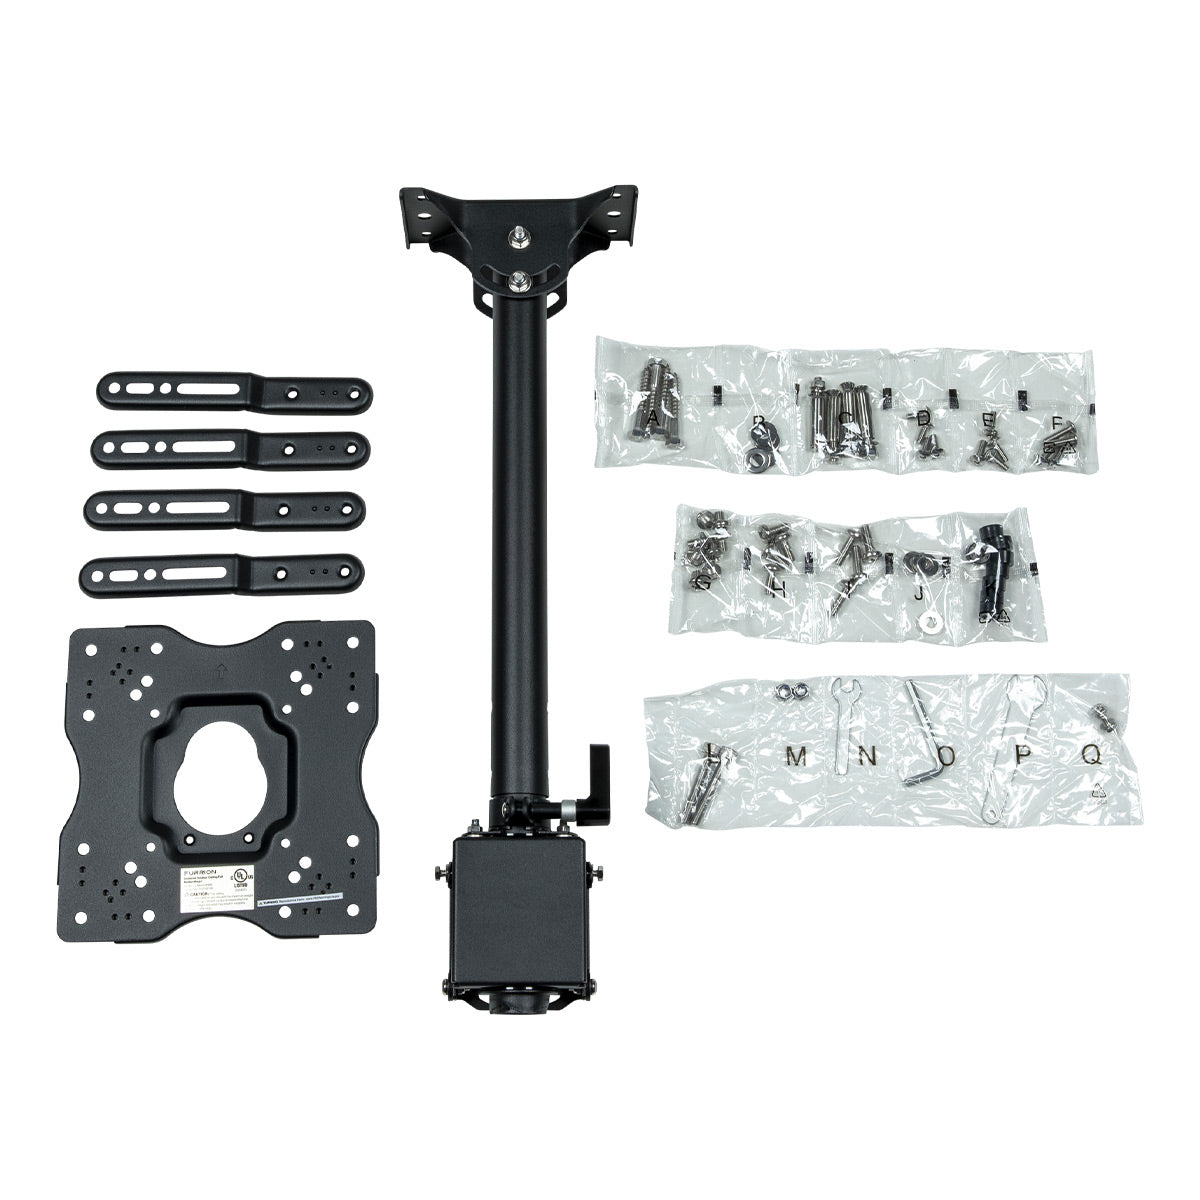 Furrion Universal Outdoor Full-Motion Ceiling Mount for Furrion Outdoor TVs